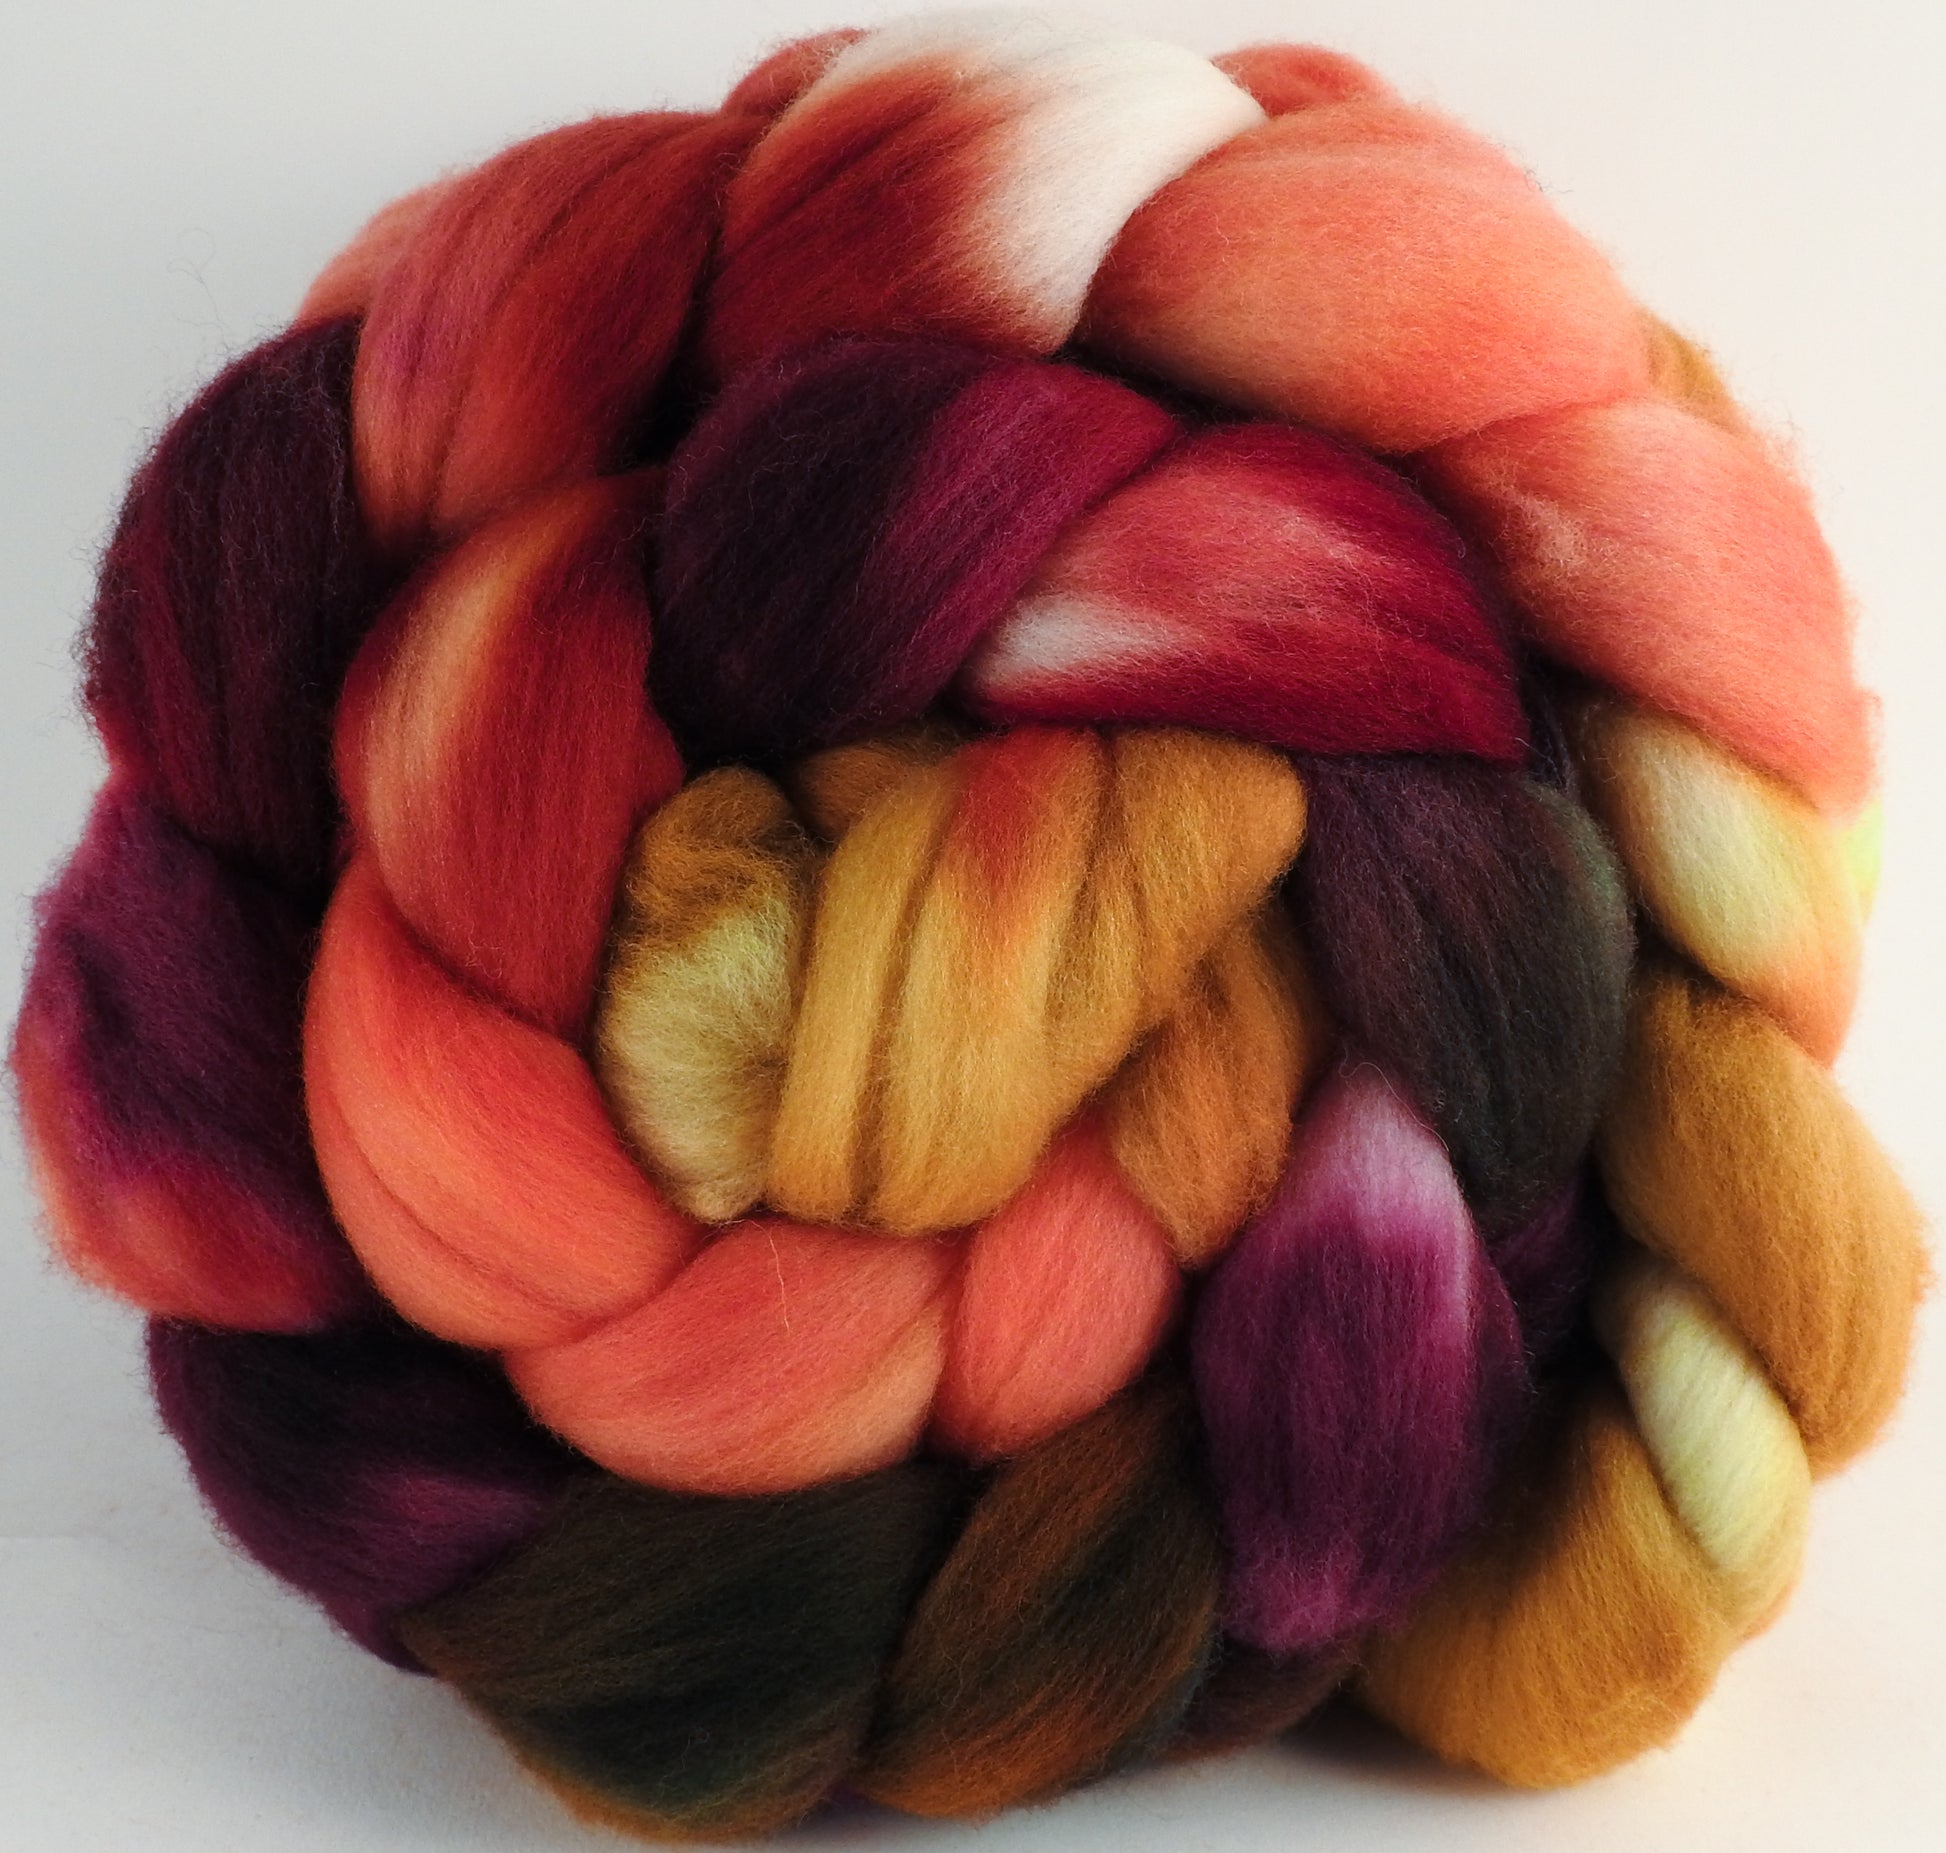 Hand dyed top for spinning - Cherry Medley - (5.3 oz.) Organic Polwarth - Inglenook Fibers